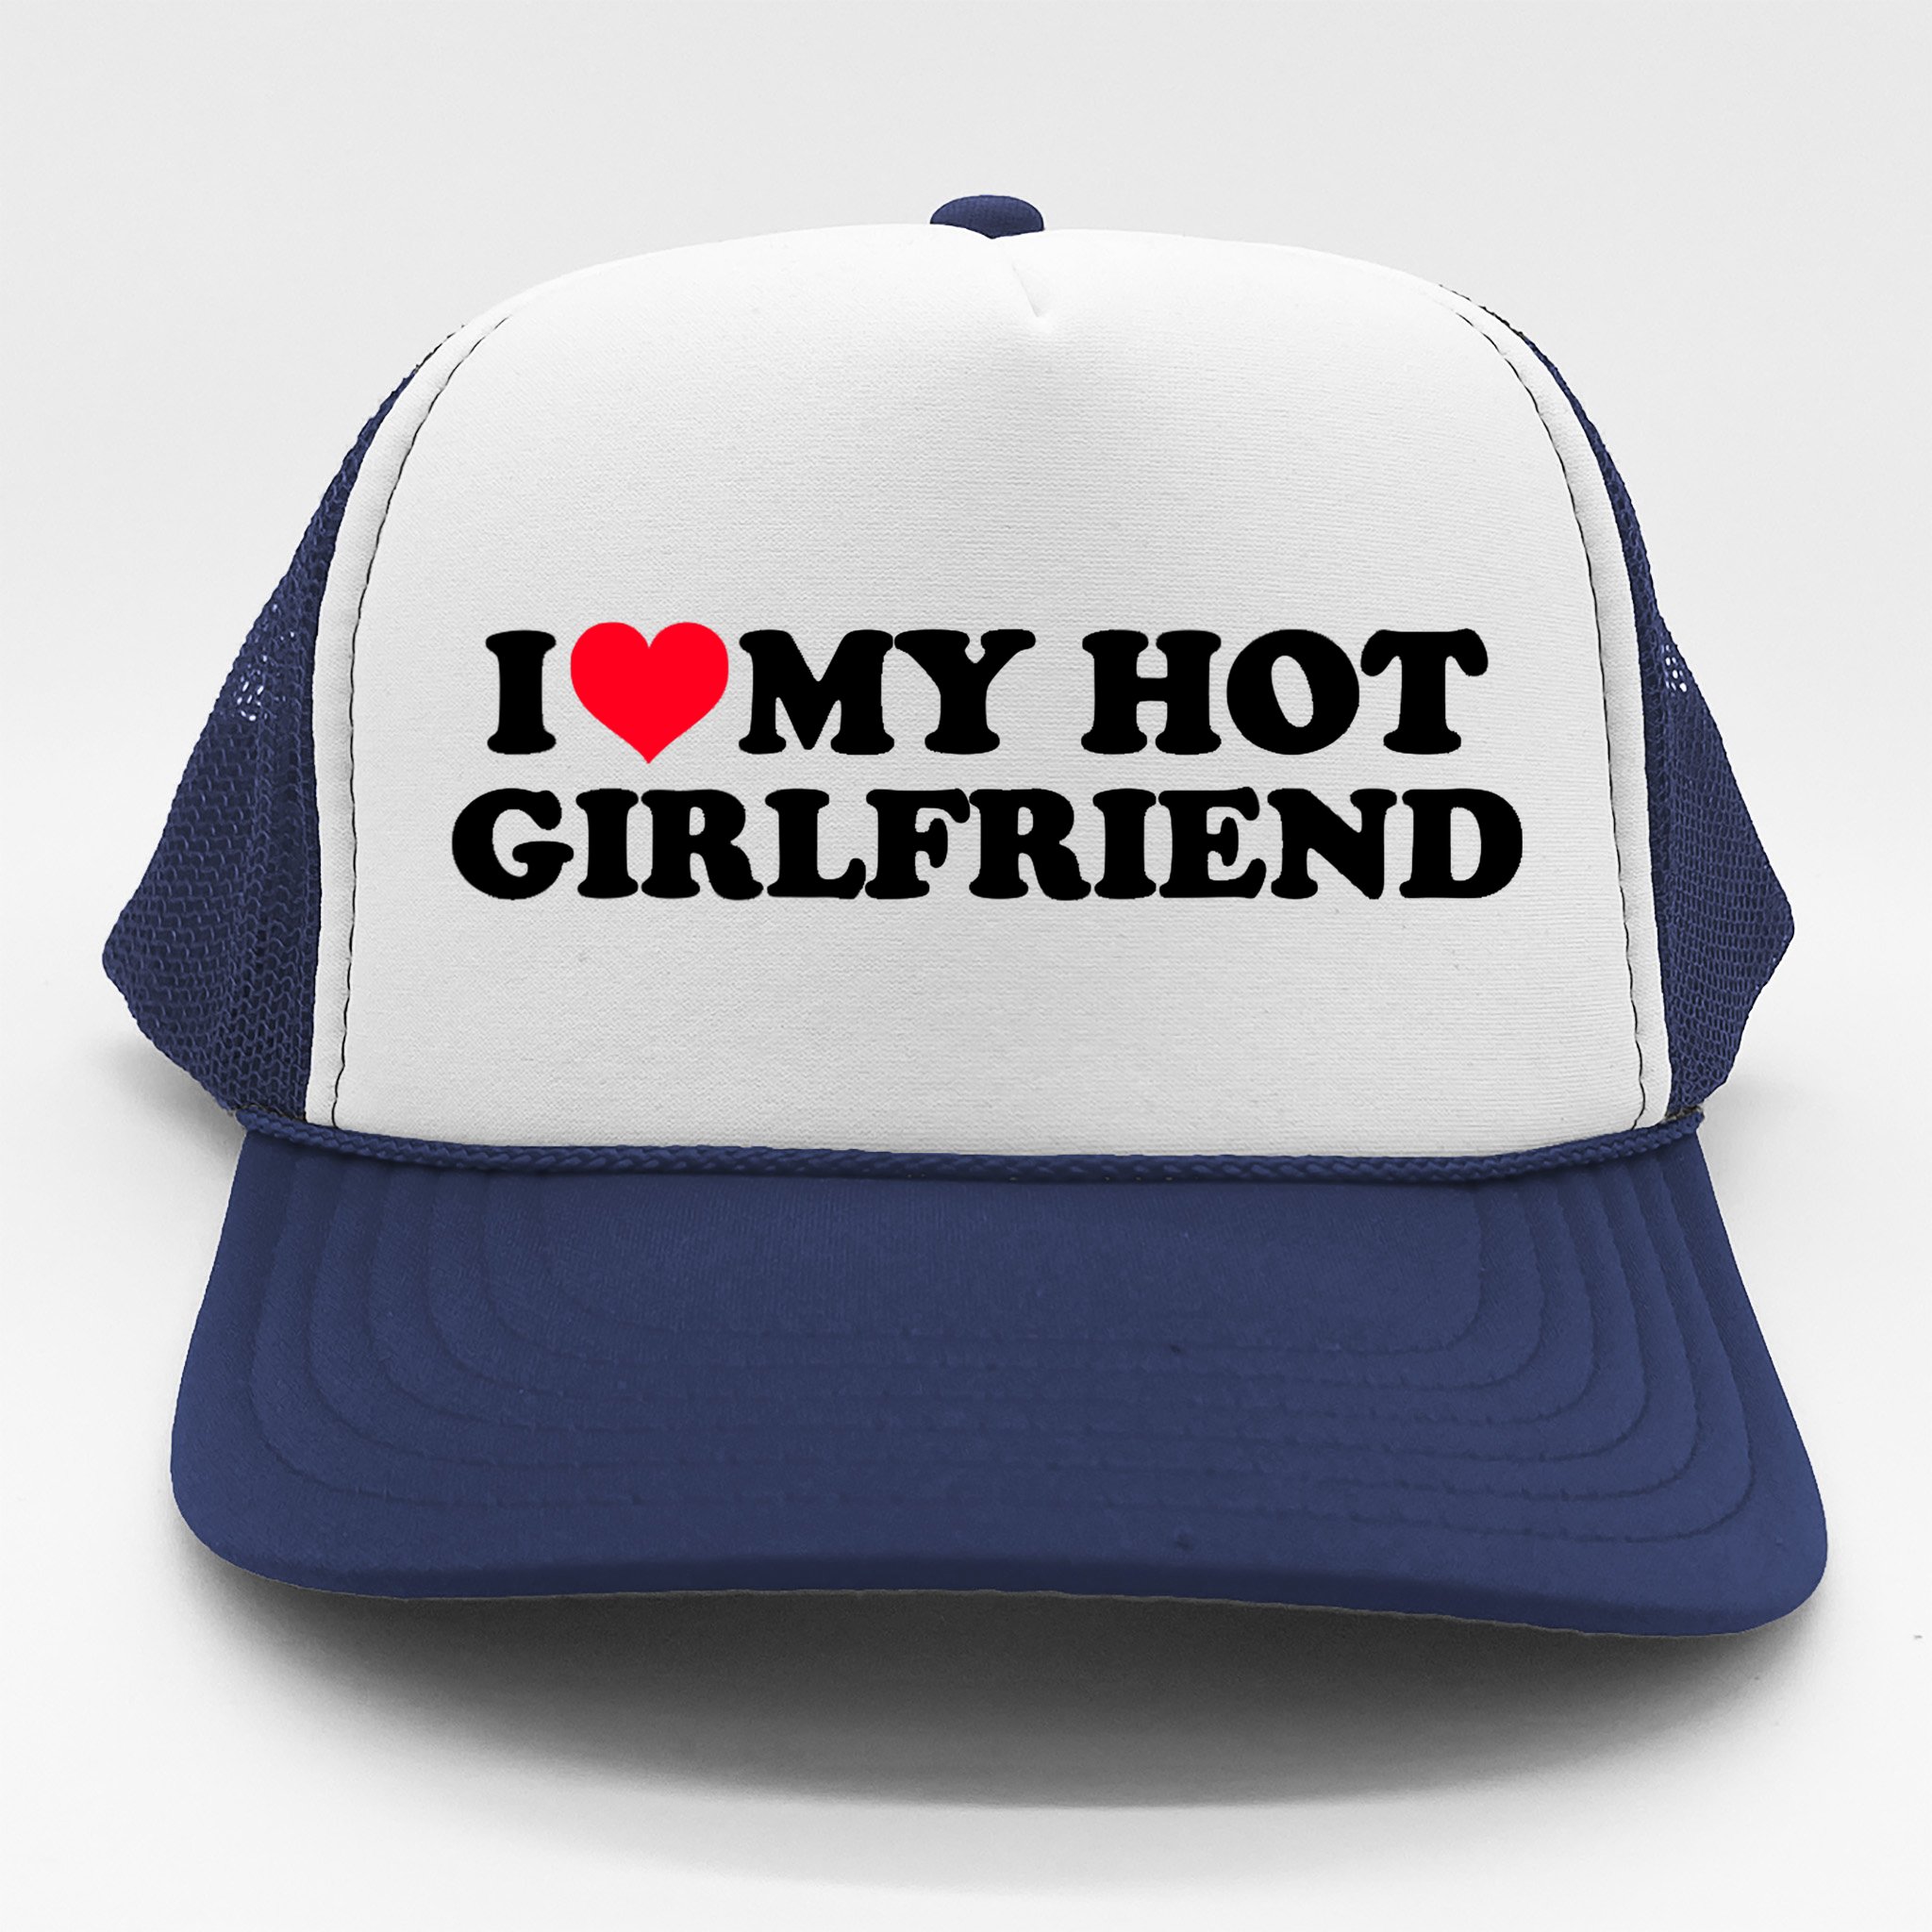 37 Sexy Gifts For Girlfriend To Have A Much Hotter Holiday